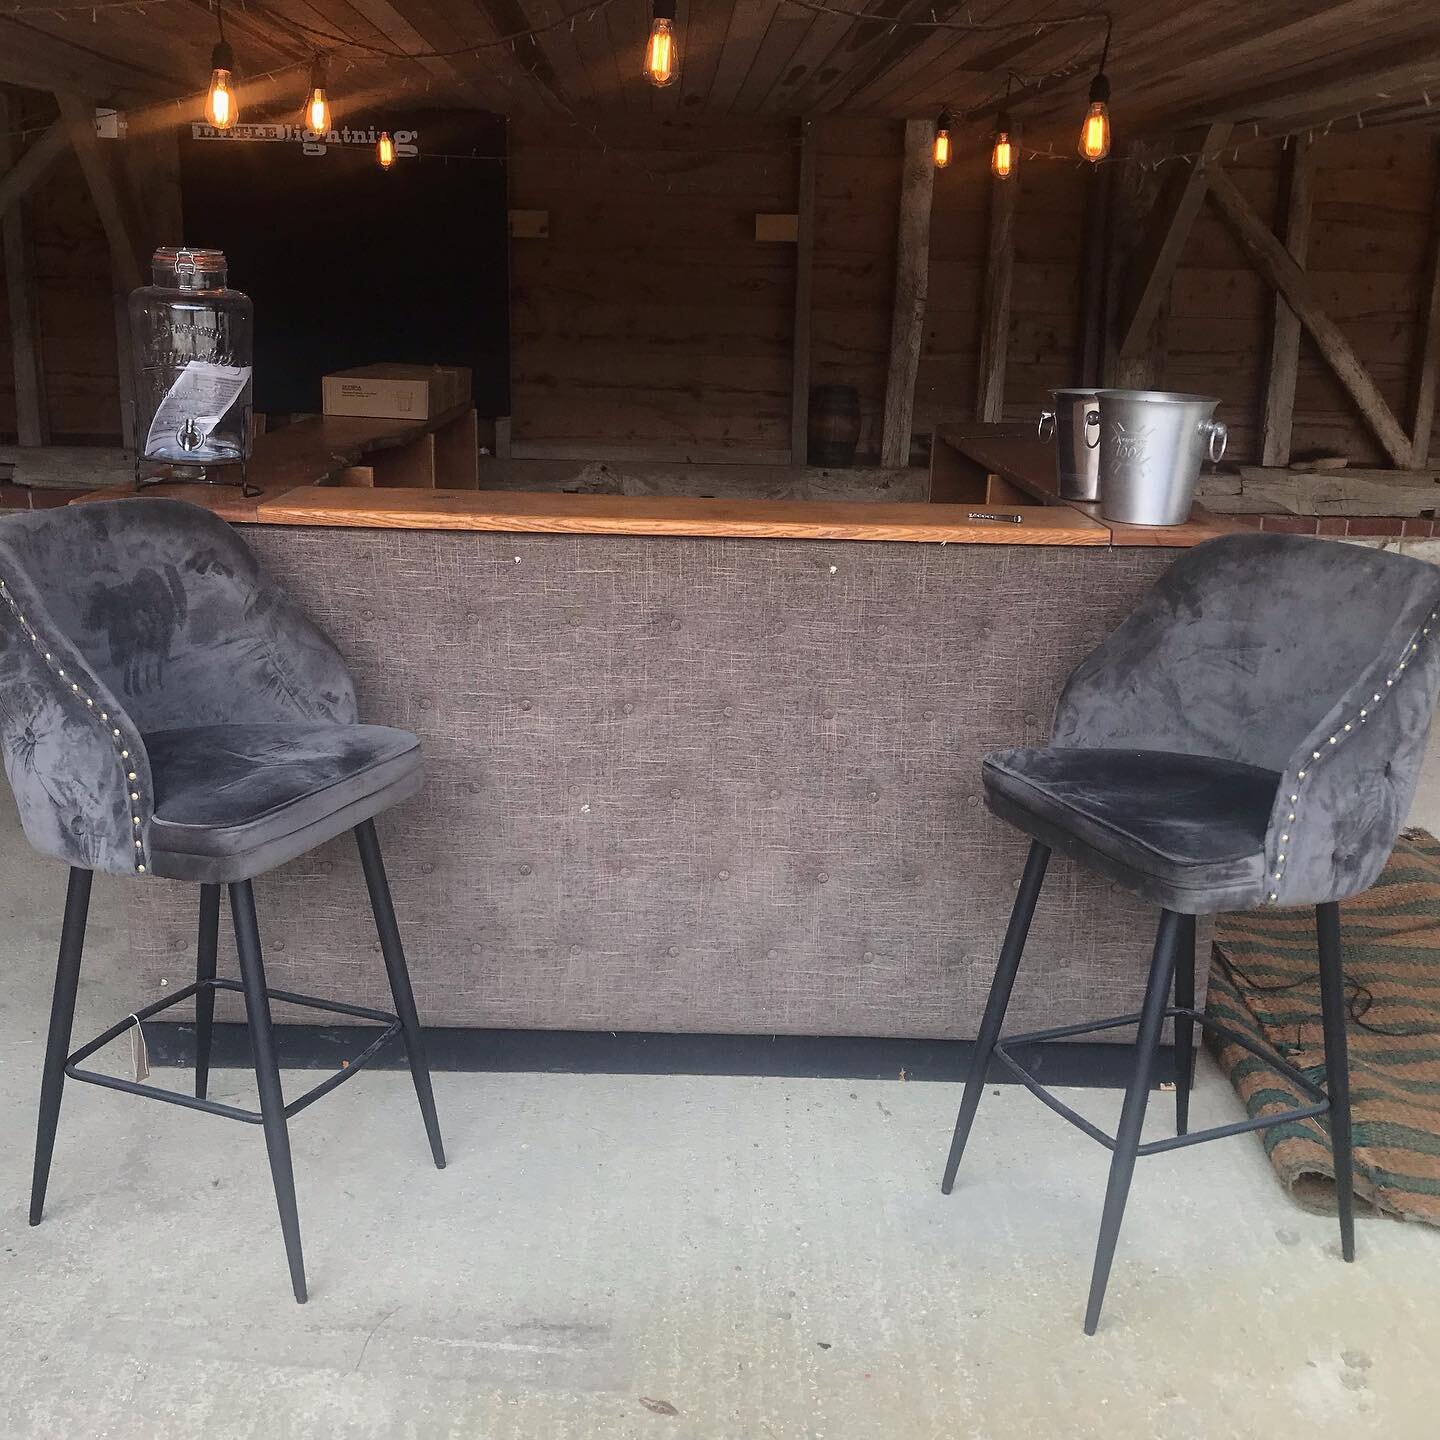 &hellip; the bar is taking shape again too with some super cosy stools.
____
#littlepopup #littlelightningcinema #southdownsnp #chichester #midhurst #haslemere #petersfield